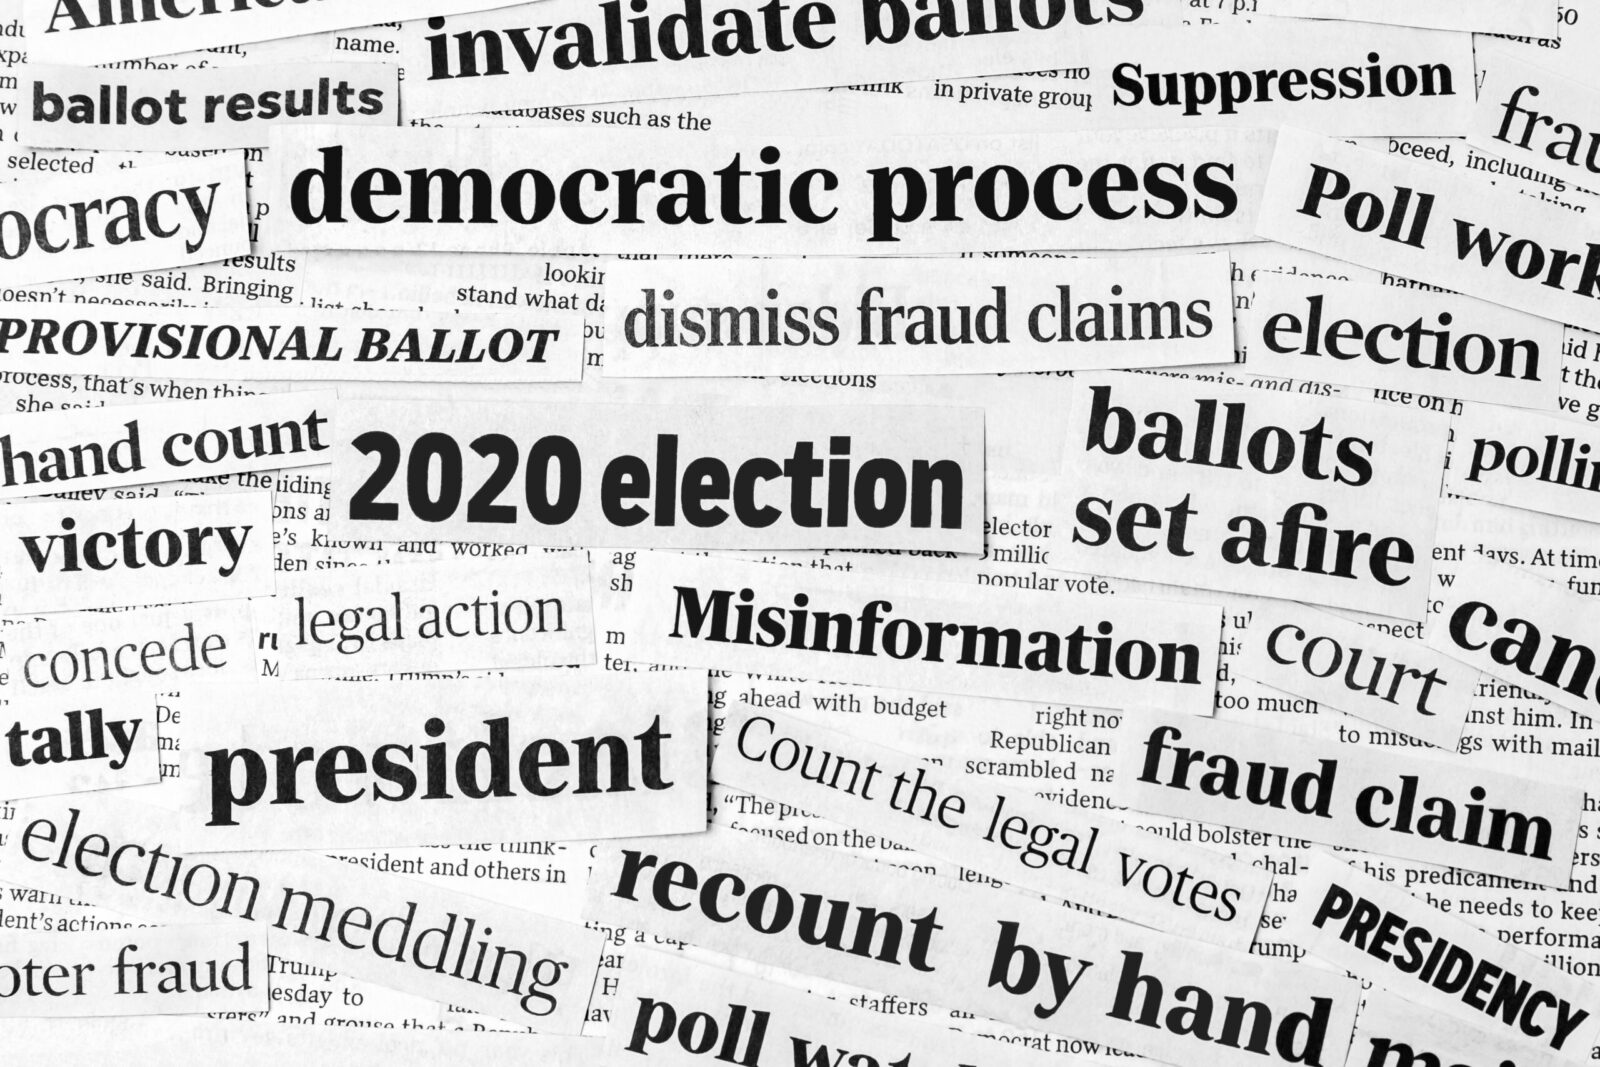 collage of newspaper headlines regarding the 2020 election including "democratic process" "dismiss fraud claims" "ballots set afire" "suppression" "invalidate ballots" "recount by hand"